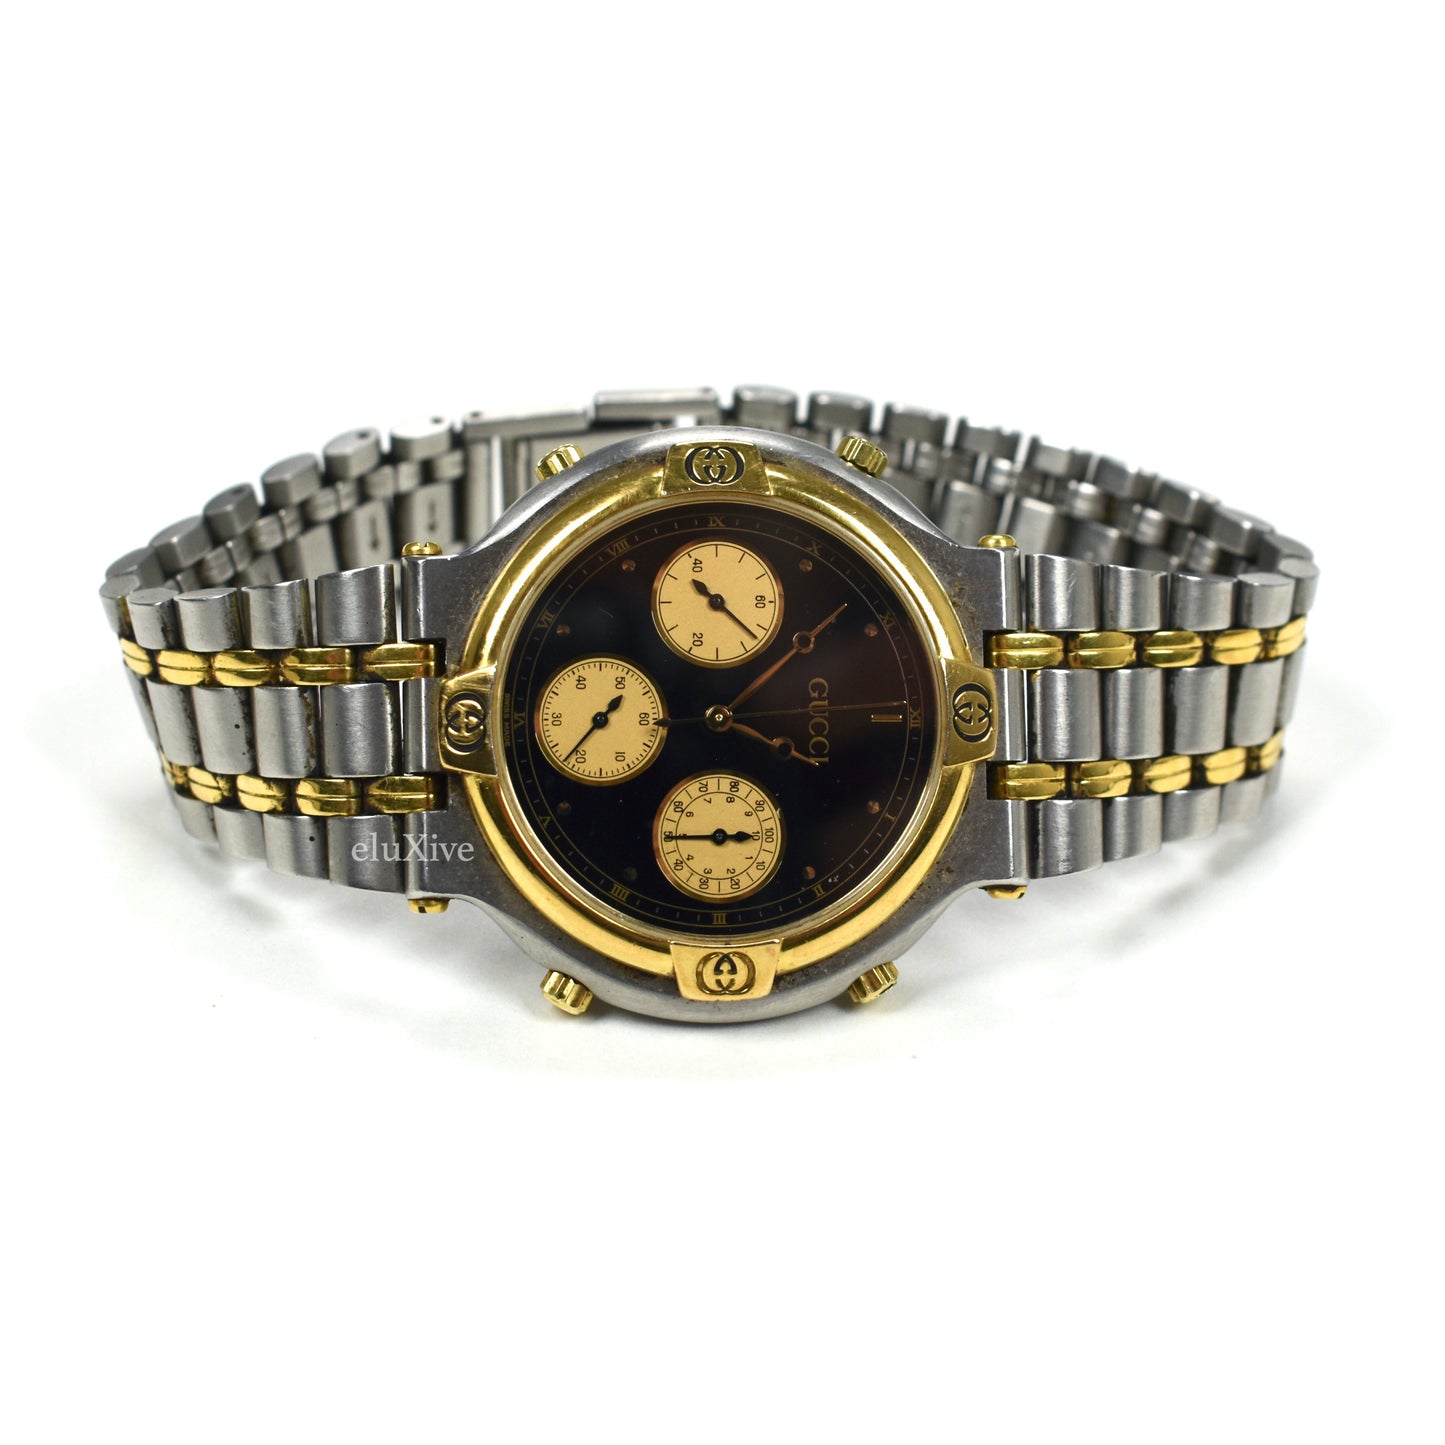 Gucci - 9400M Steel/Gold Chronograph Watch